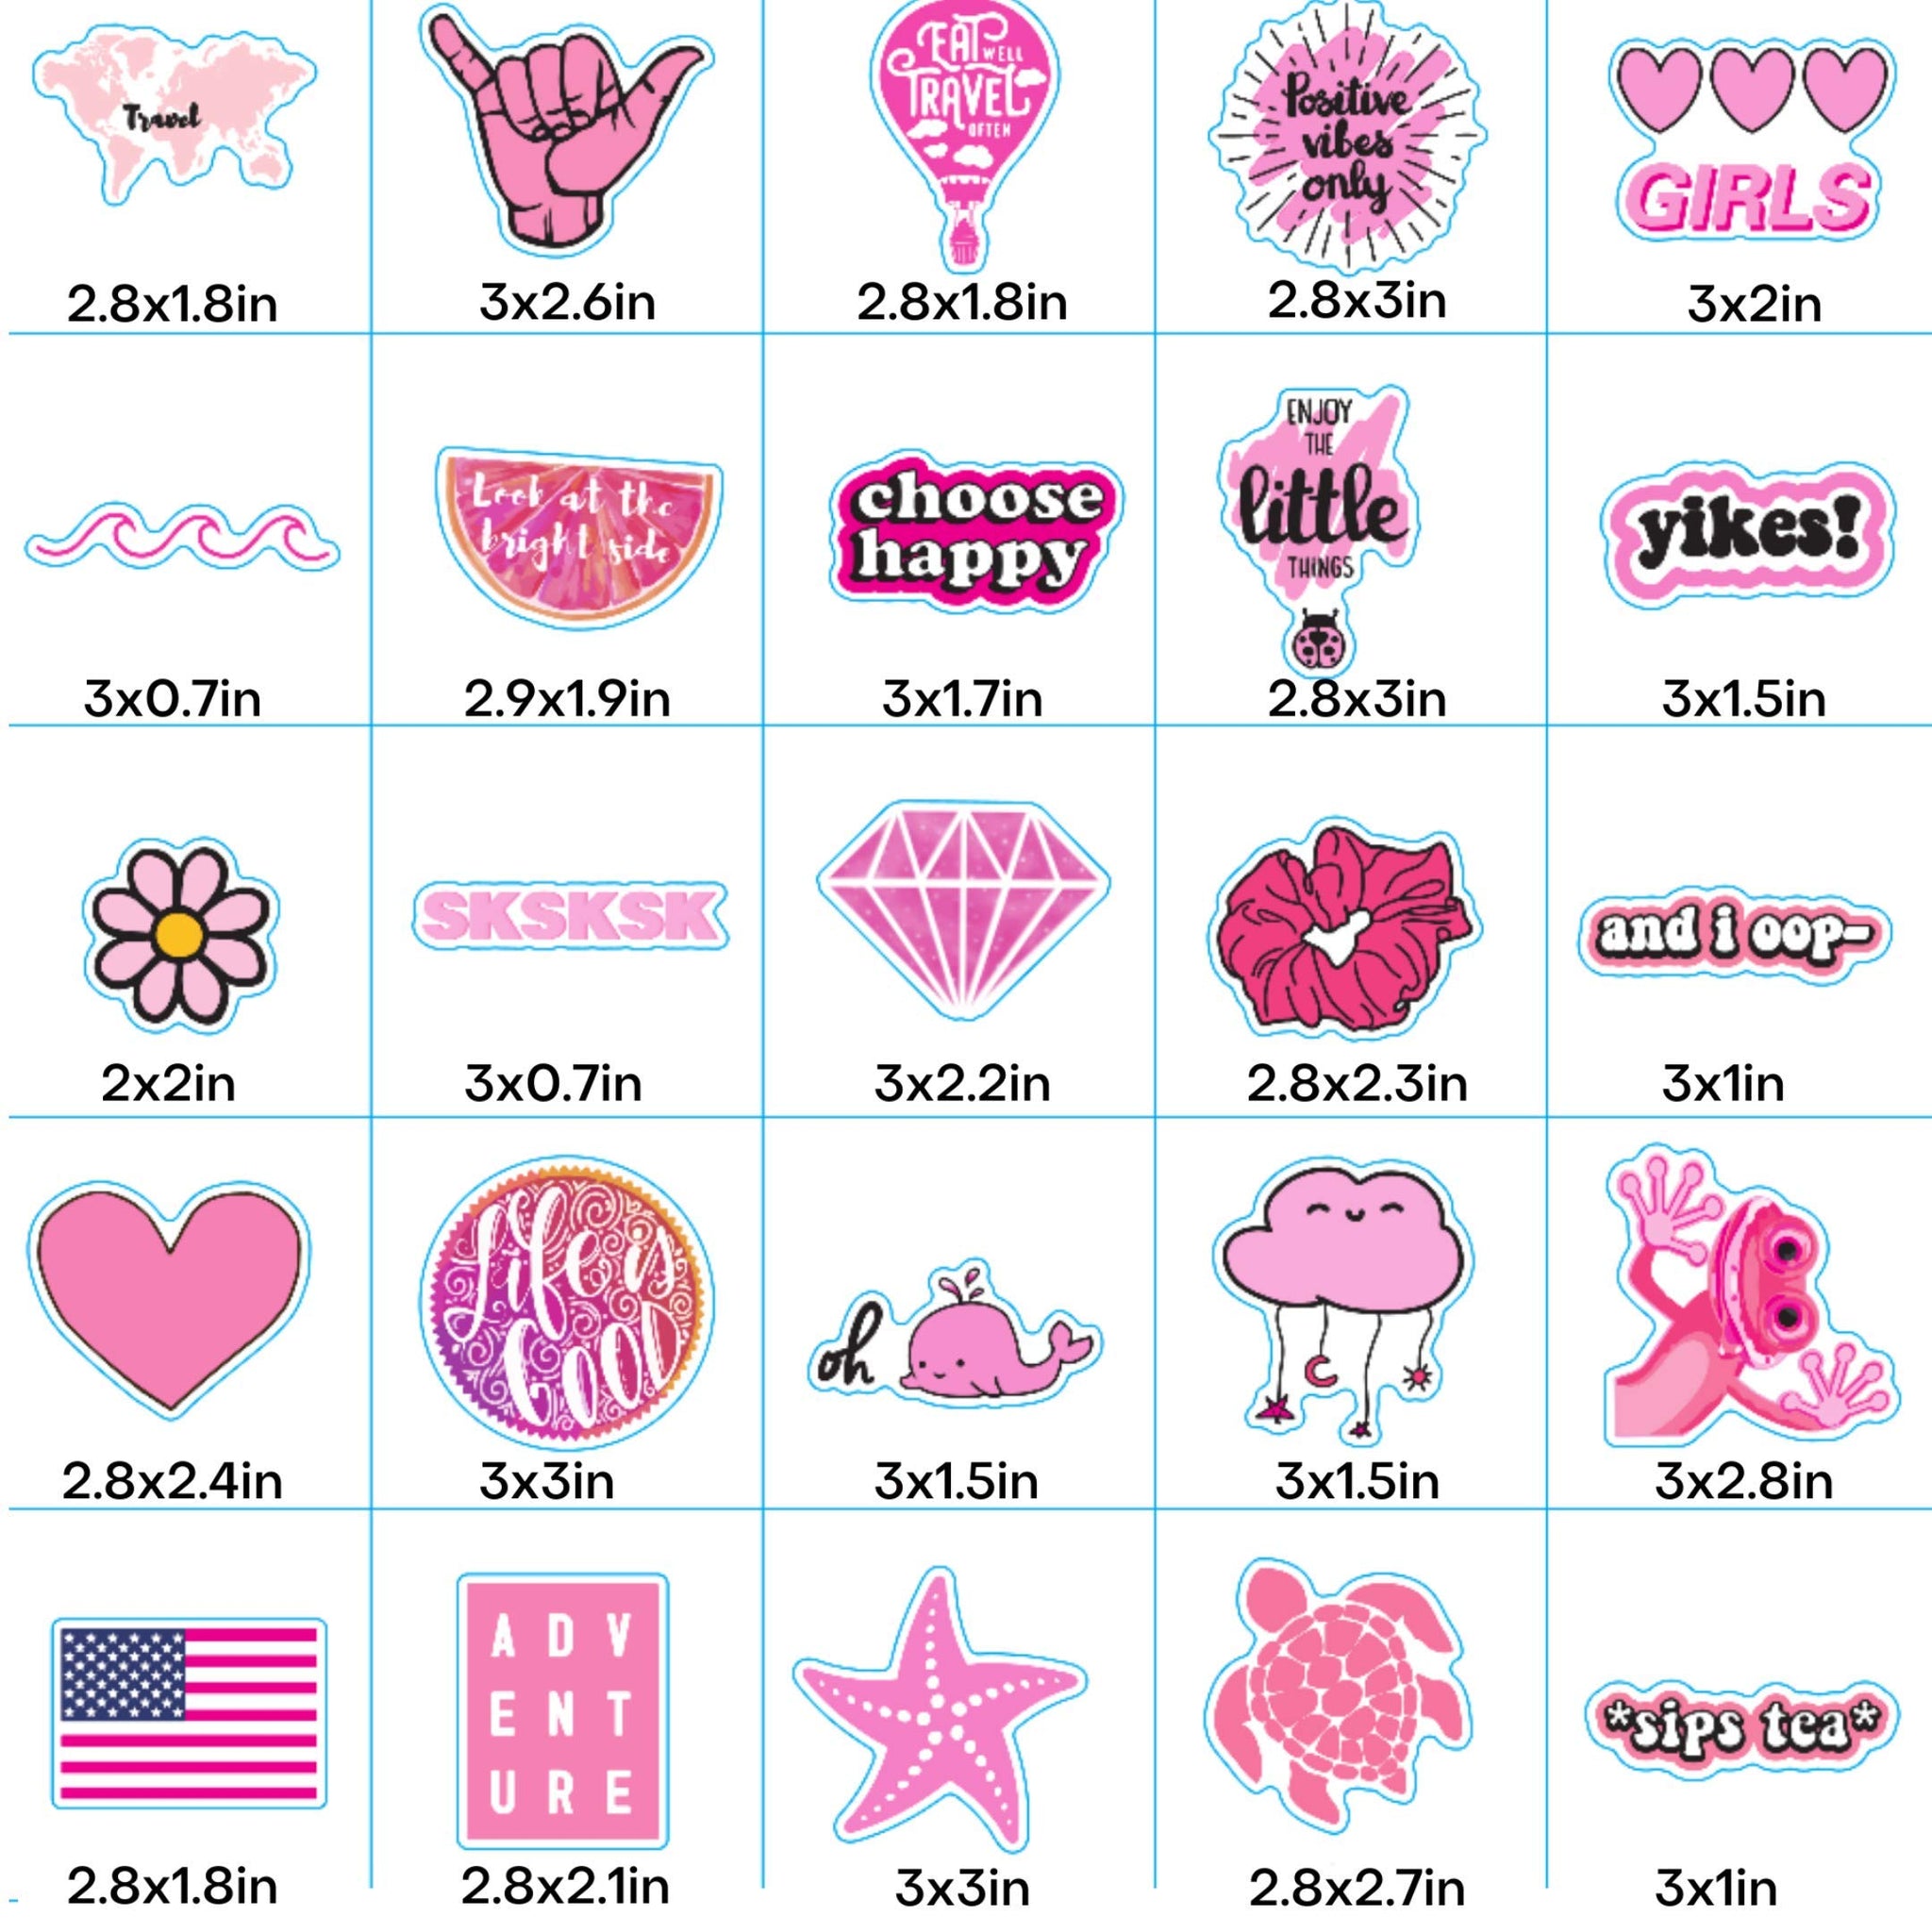 Big Moods Aesthetic Sticker Pack 10pc - Pink  Aesthetic stickers, Cute  laptop stickers, Homemade stickers